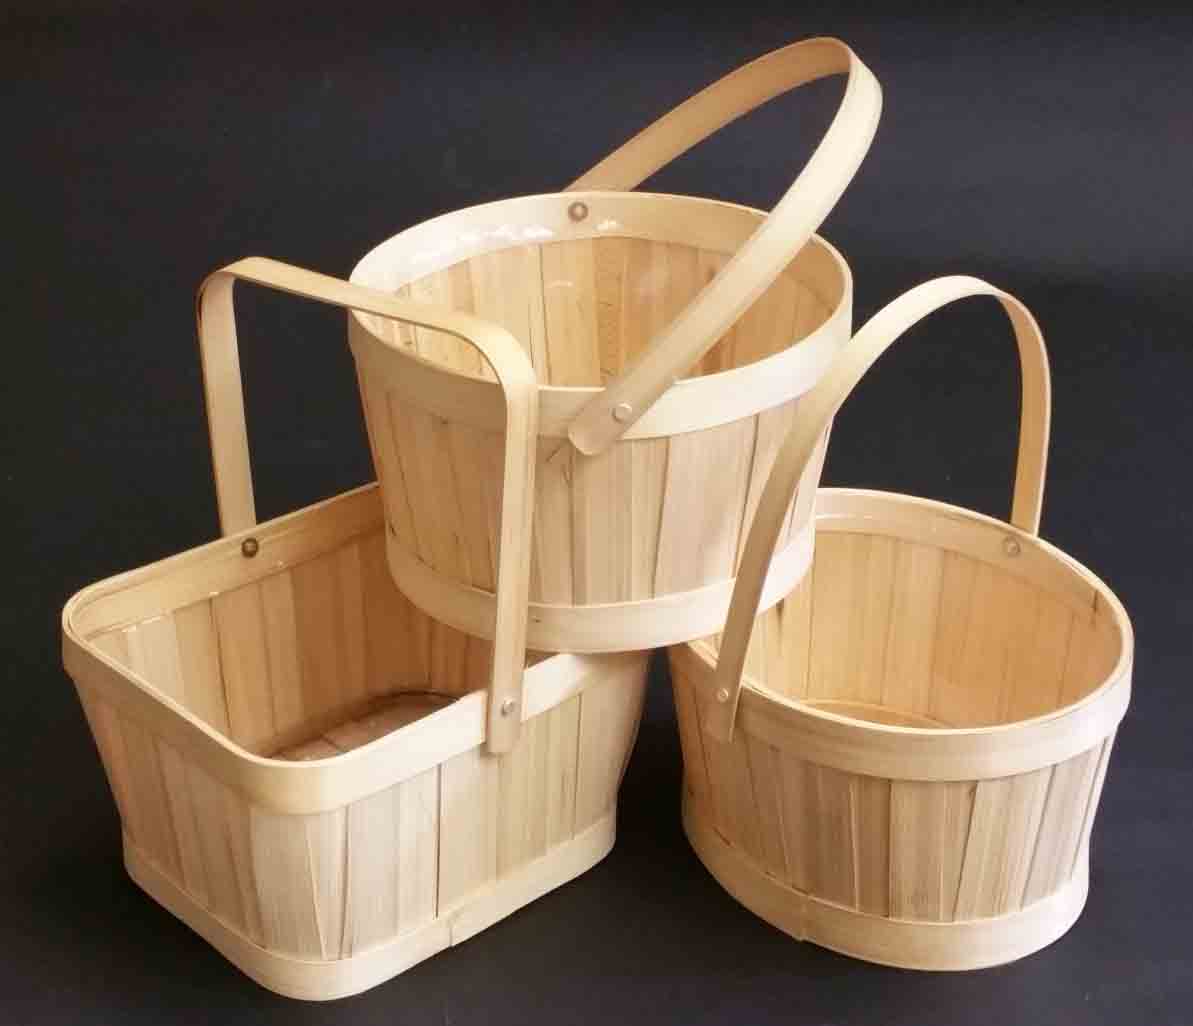 19758 - Orchard Baskets with Handles & Liners - 5.45 ea, 4.95/36